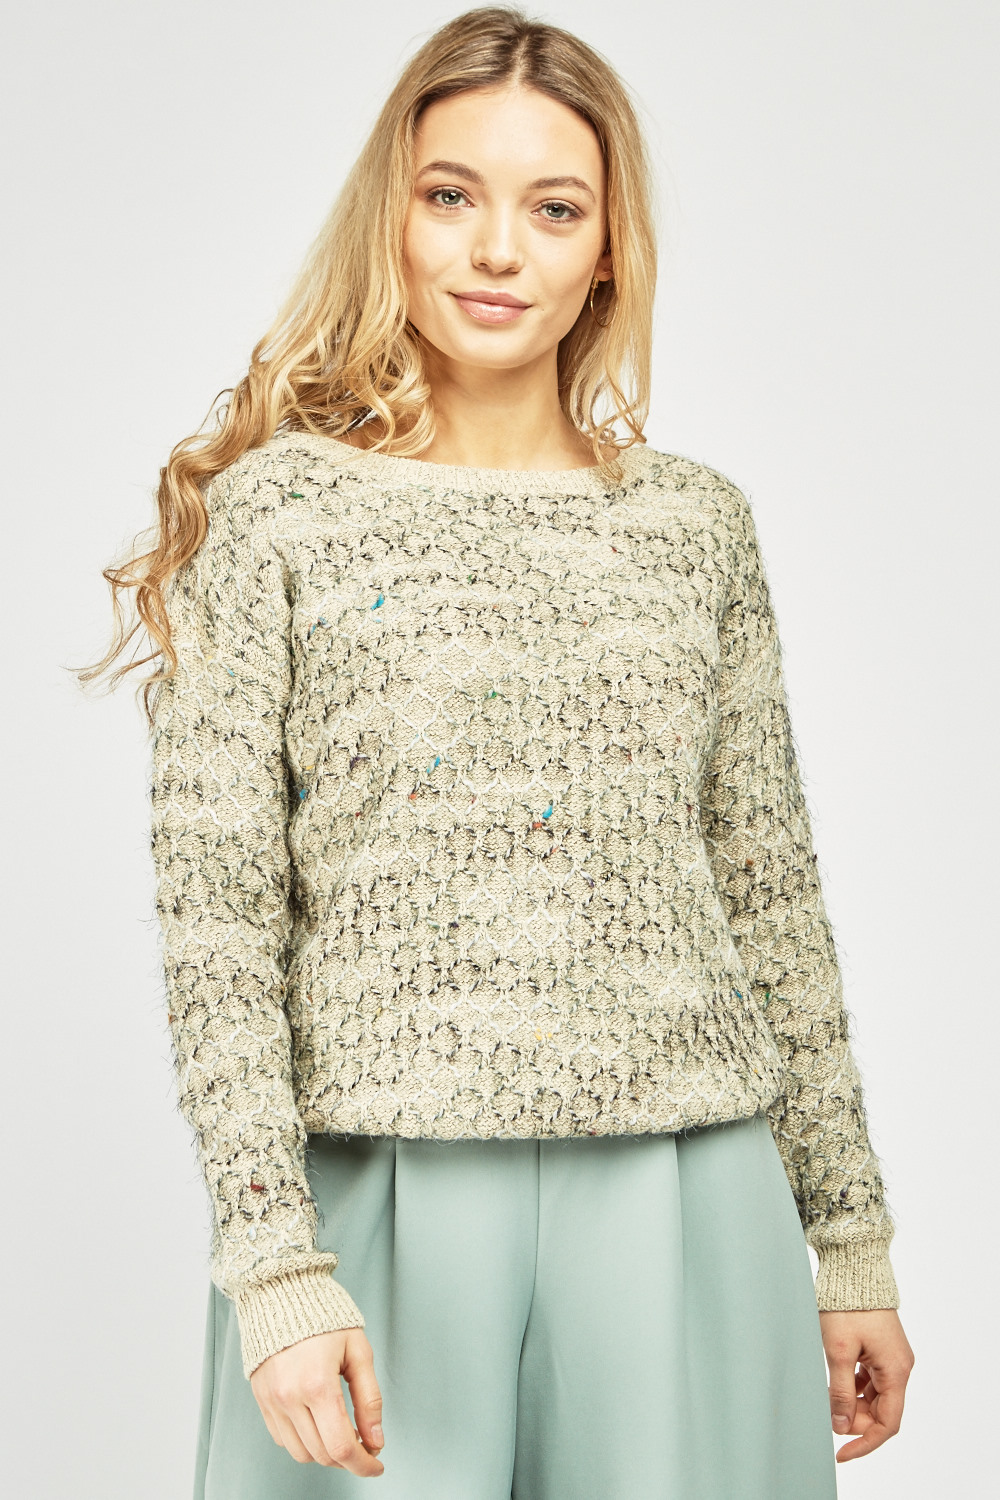 Diamond Contrasted Knit Jumper - Just $3